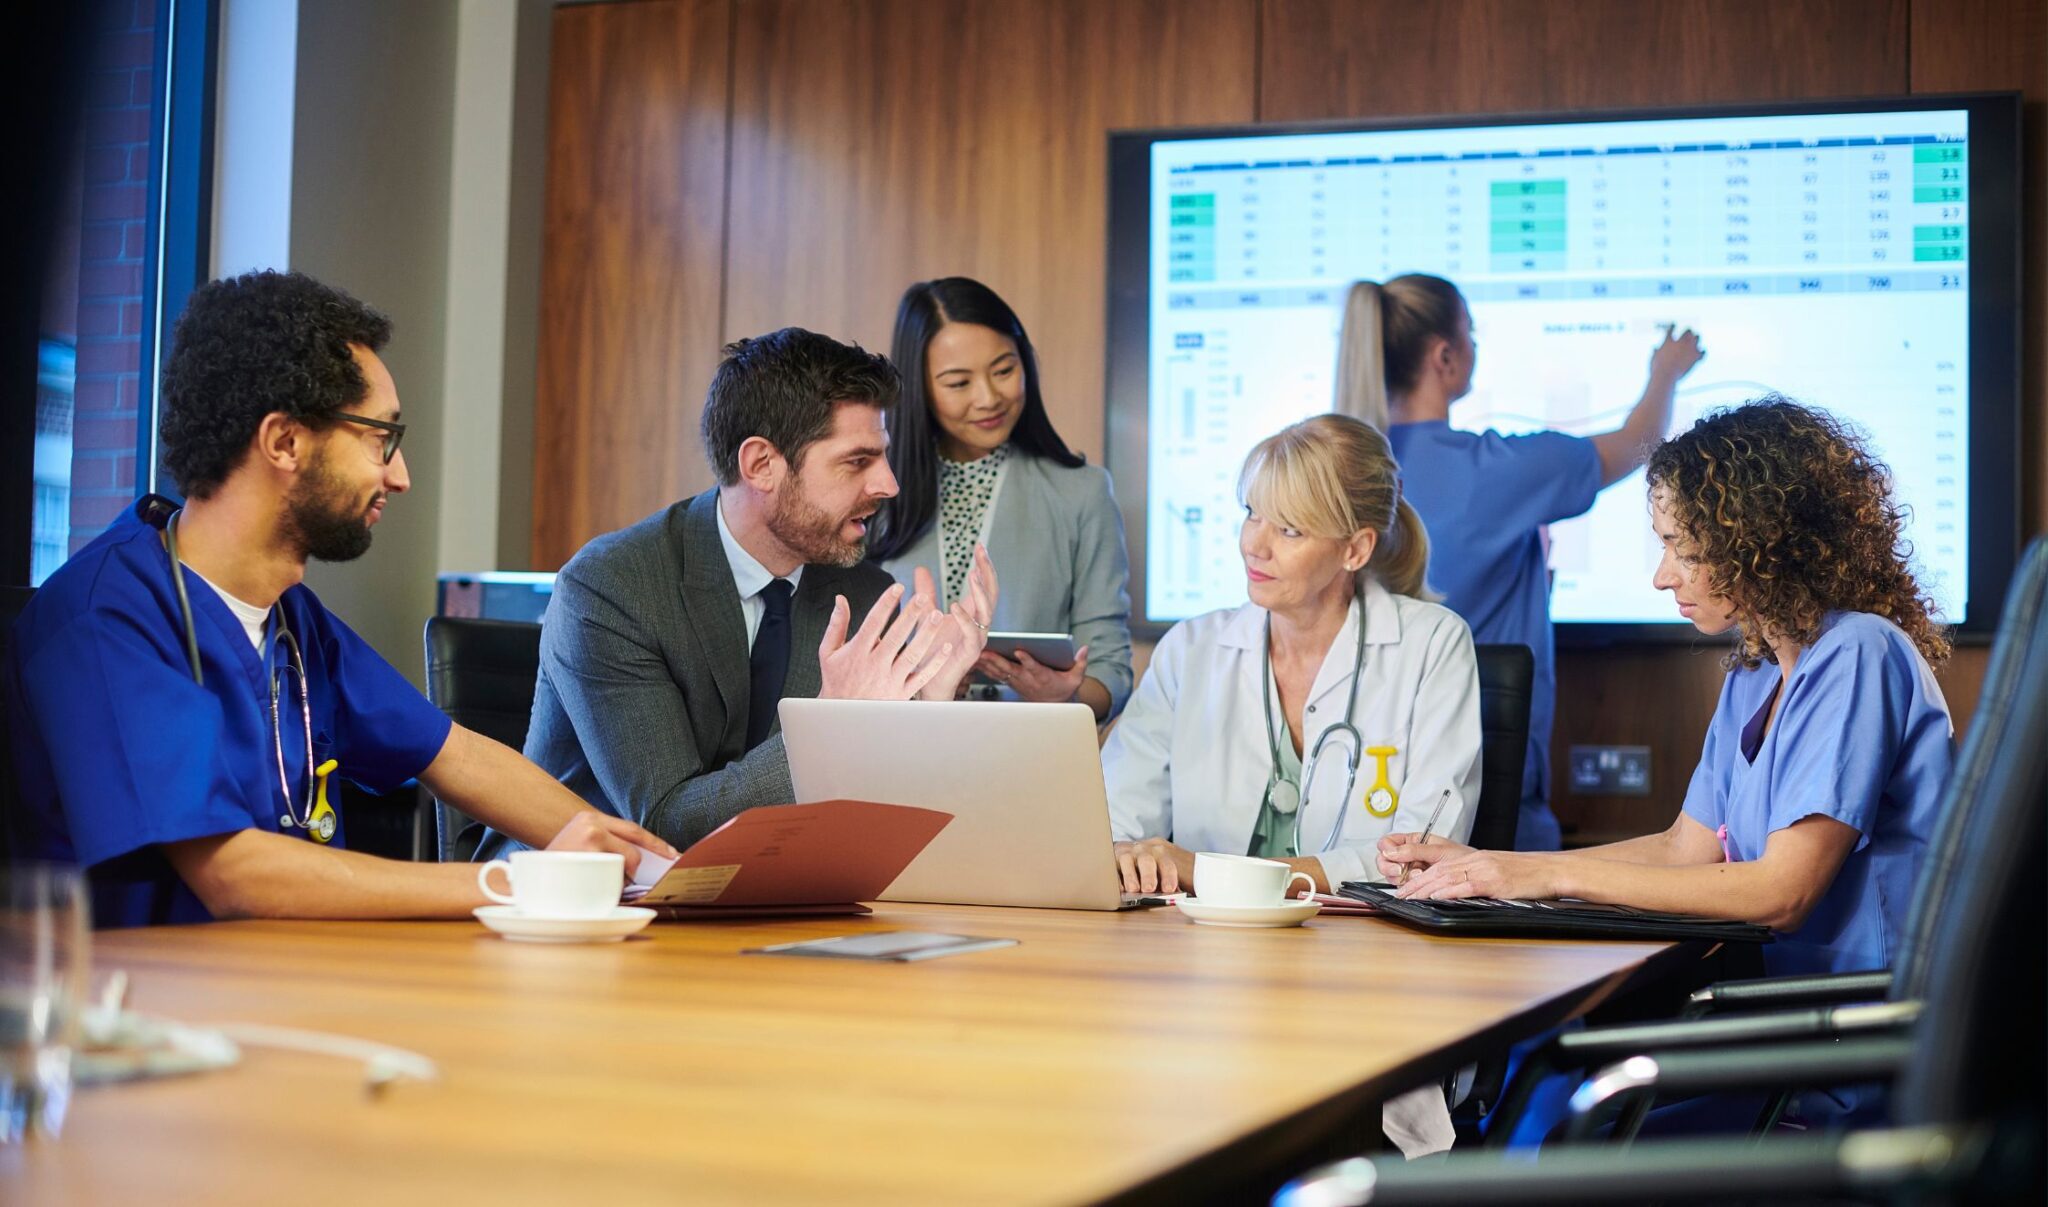 Mixed group of health professions in discussion around a boardroom table. A projected chart of data is being displayed on a screen behind the medical professionsal